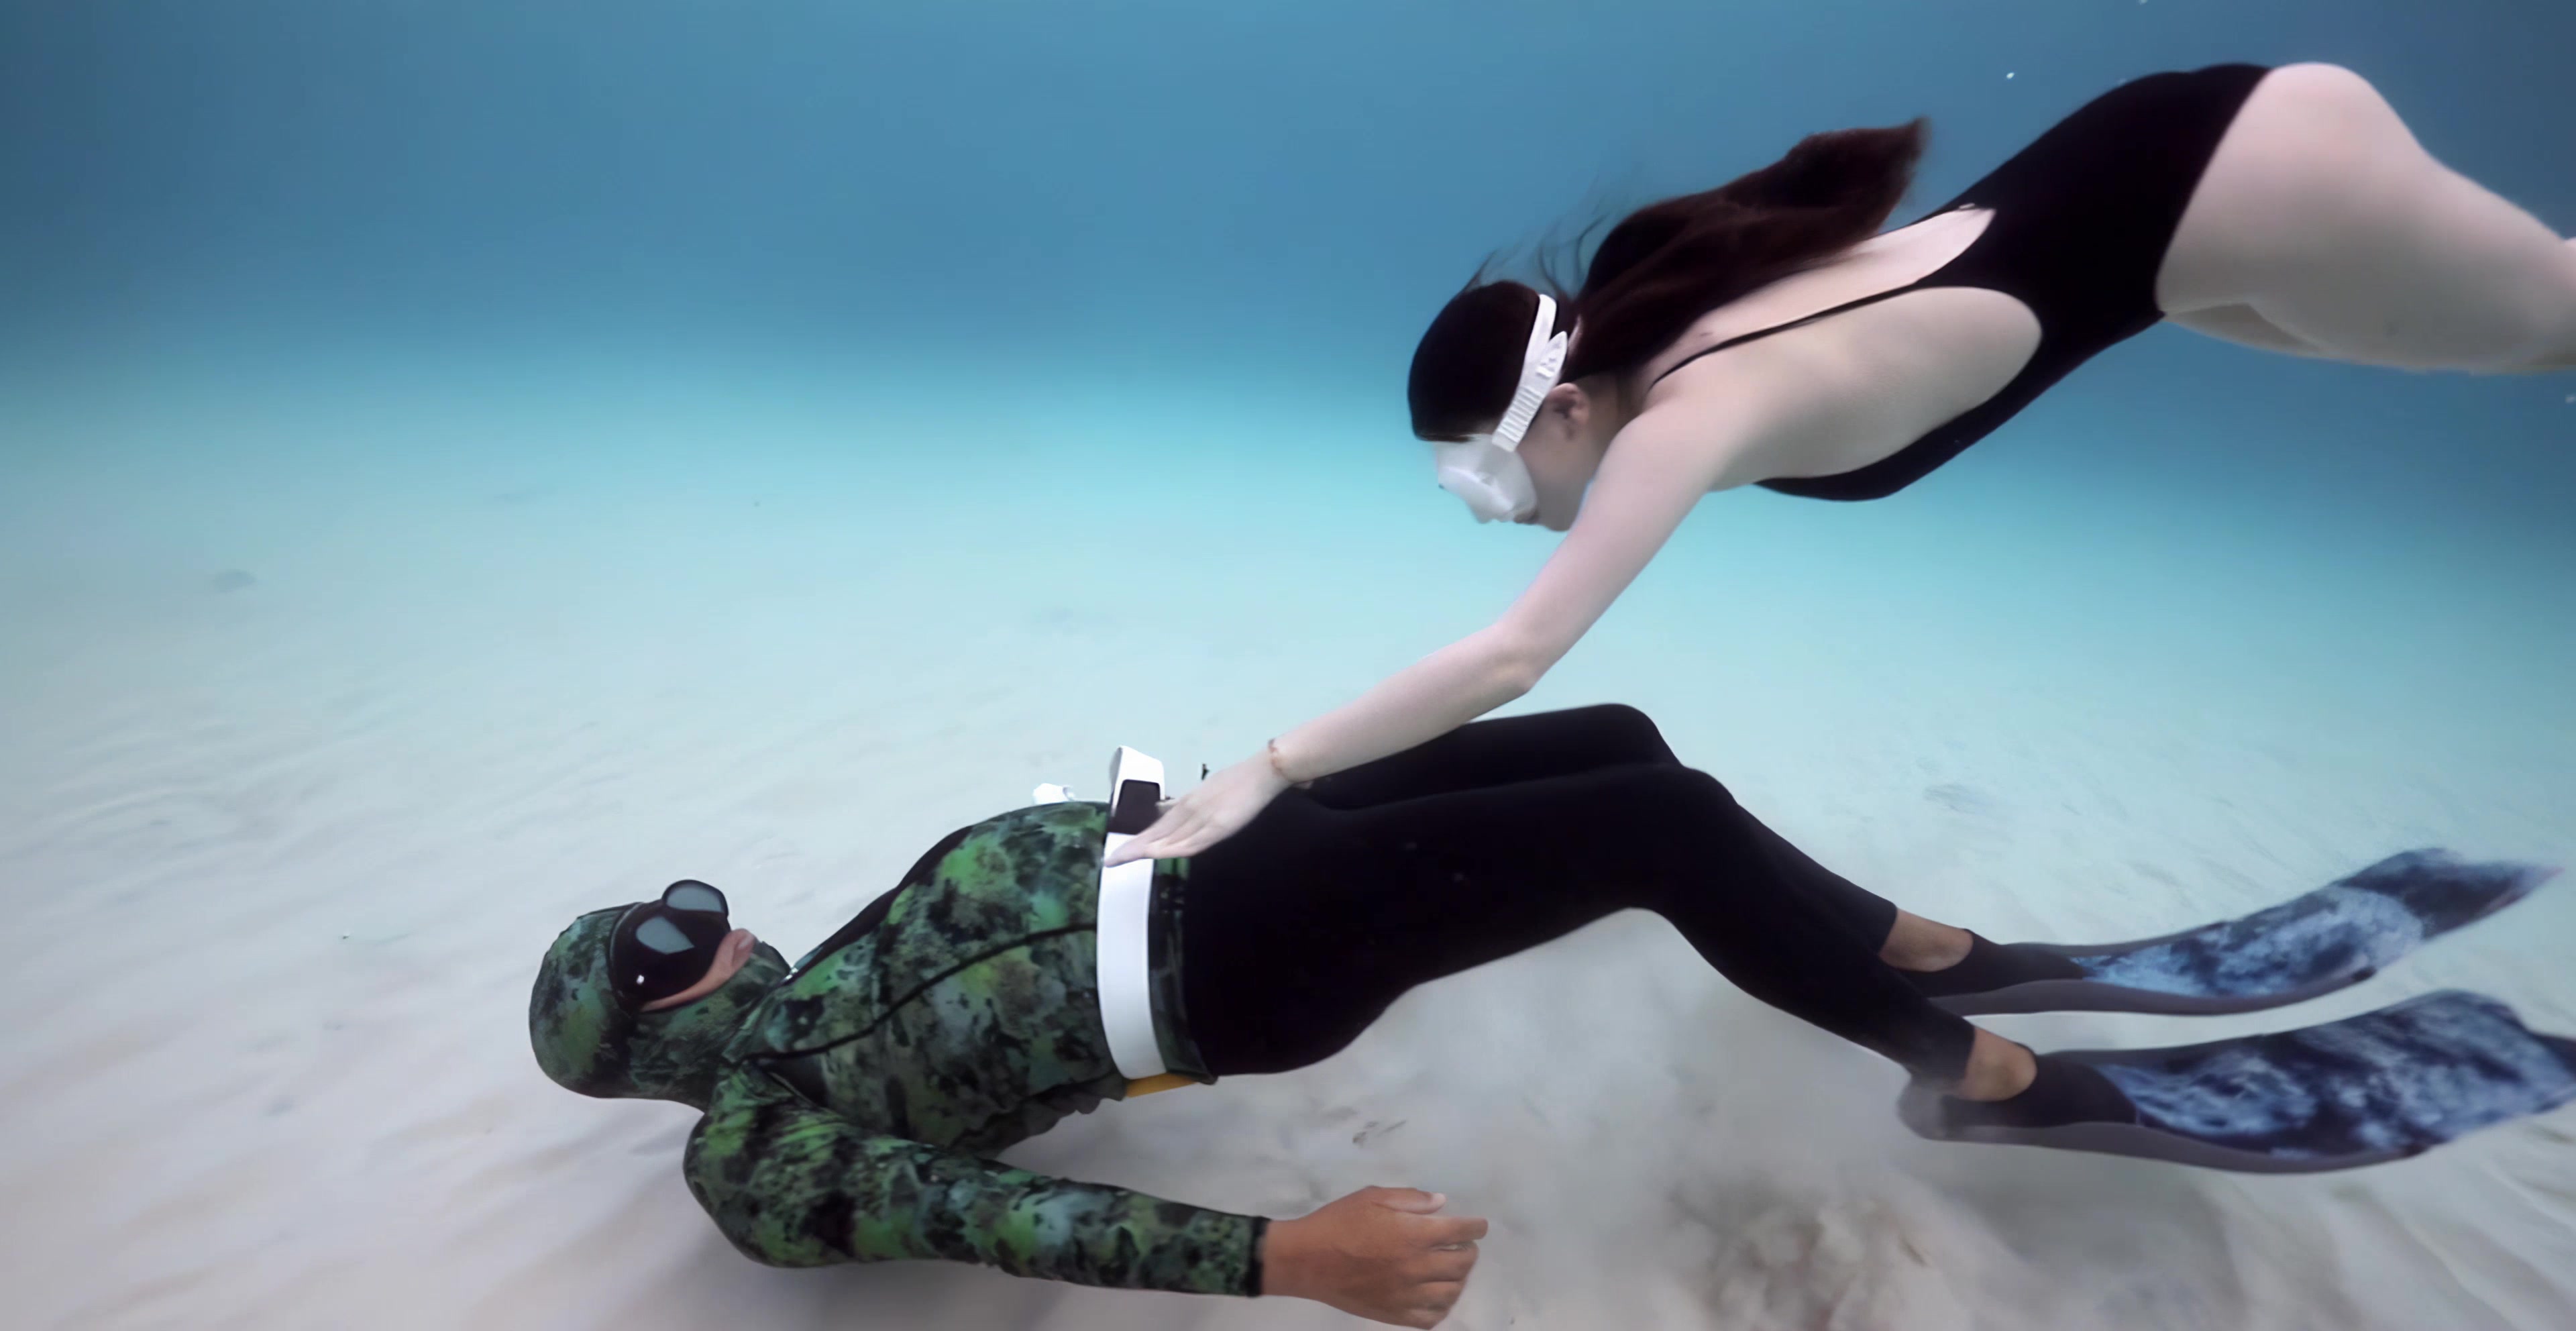 Meet the Freediving Couple Who Make Stunning Underwater Photos With No Scuba Gear